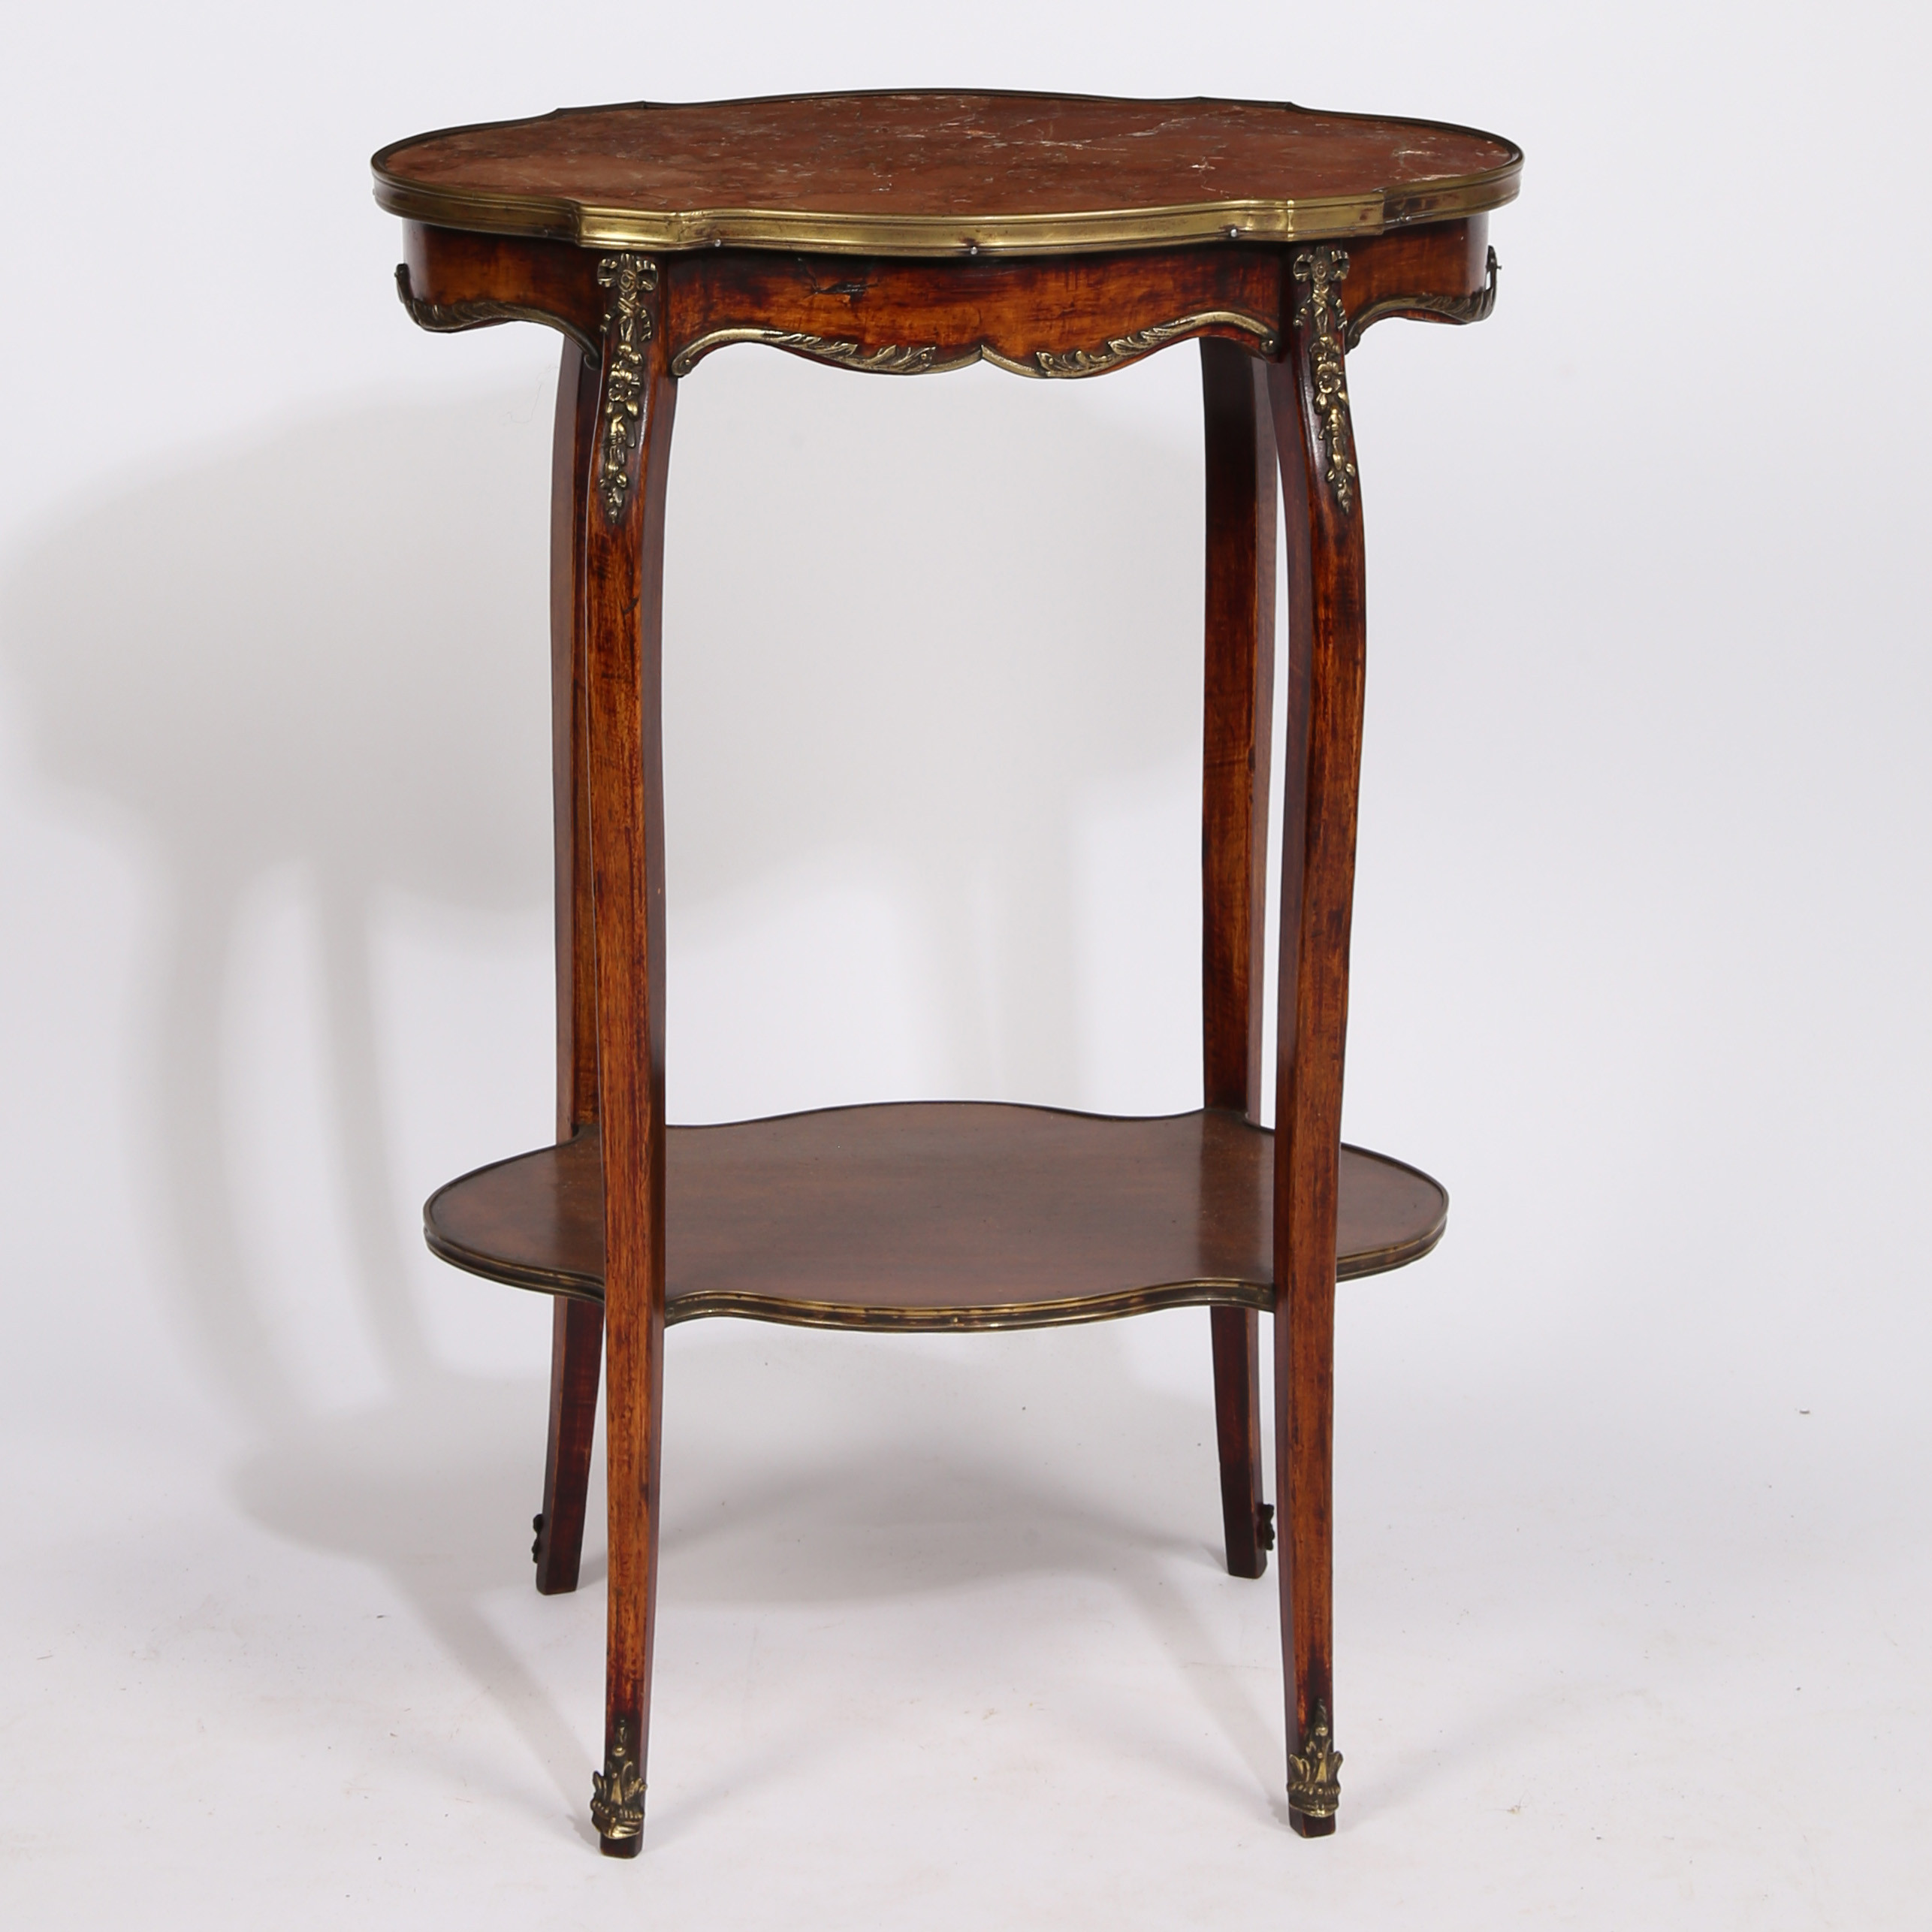 A 19TH CENTURY FRENCH MARBLE TOPPED TWO TIER TABLE.